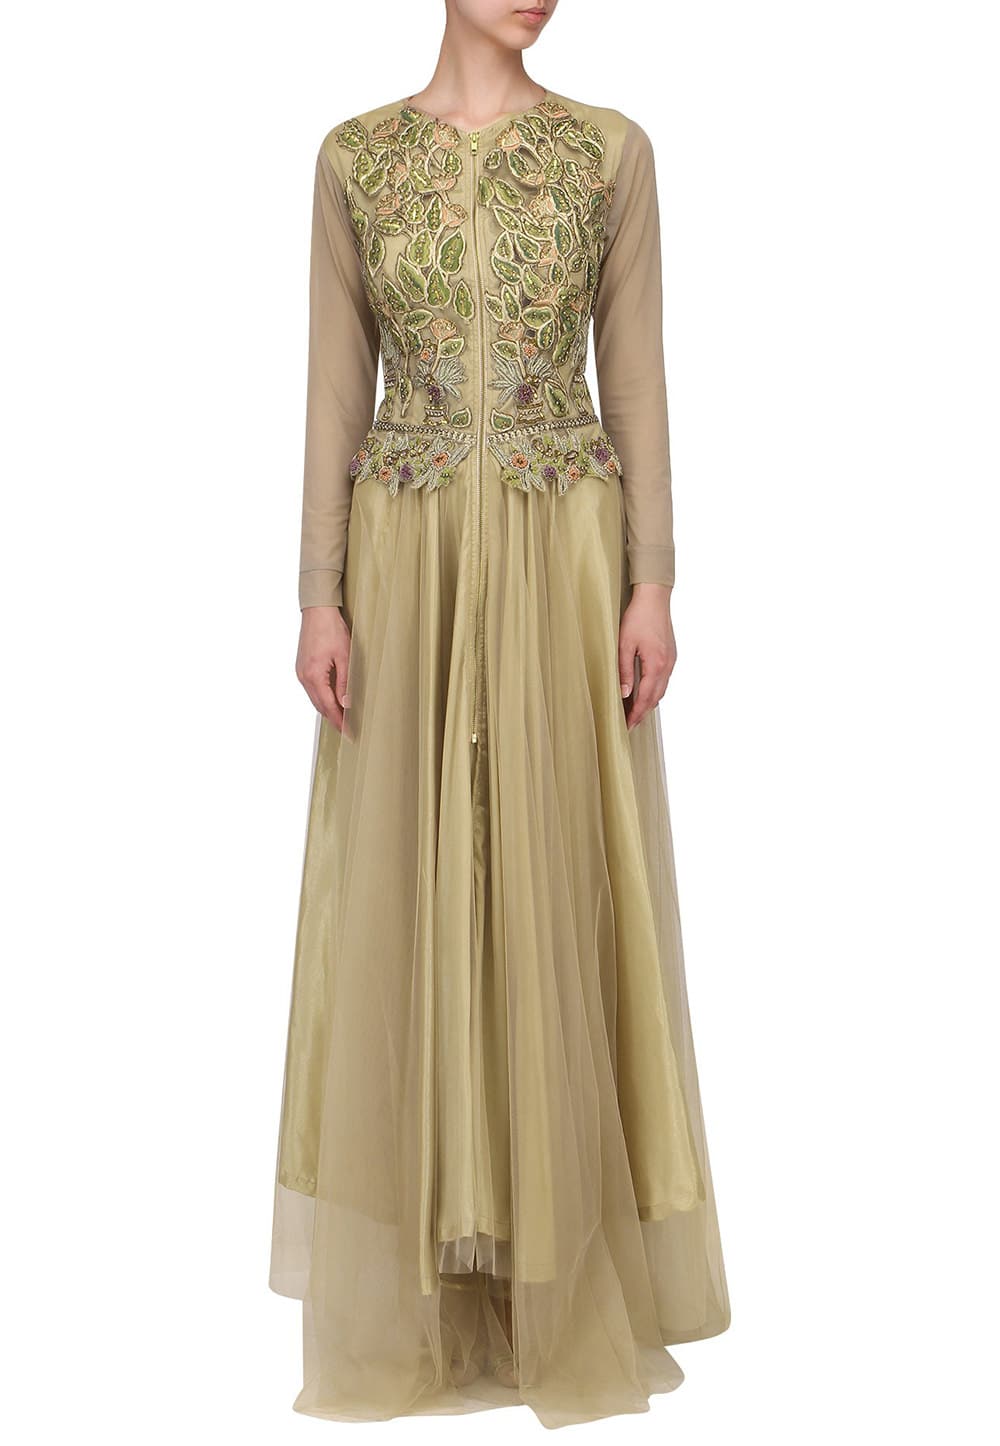 Gold drop waist fitted gown available only at IBFW